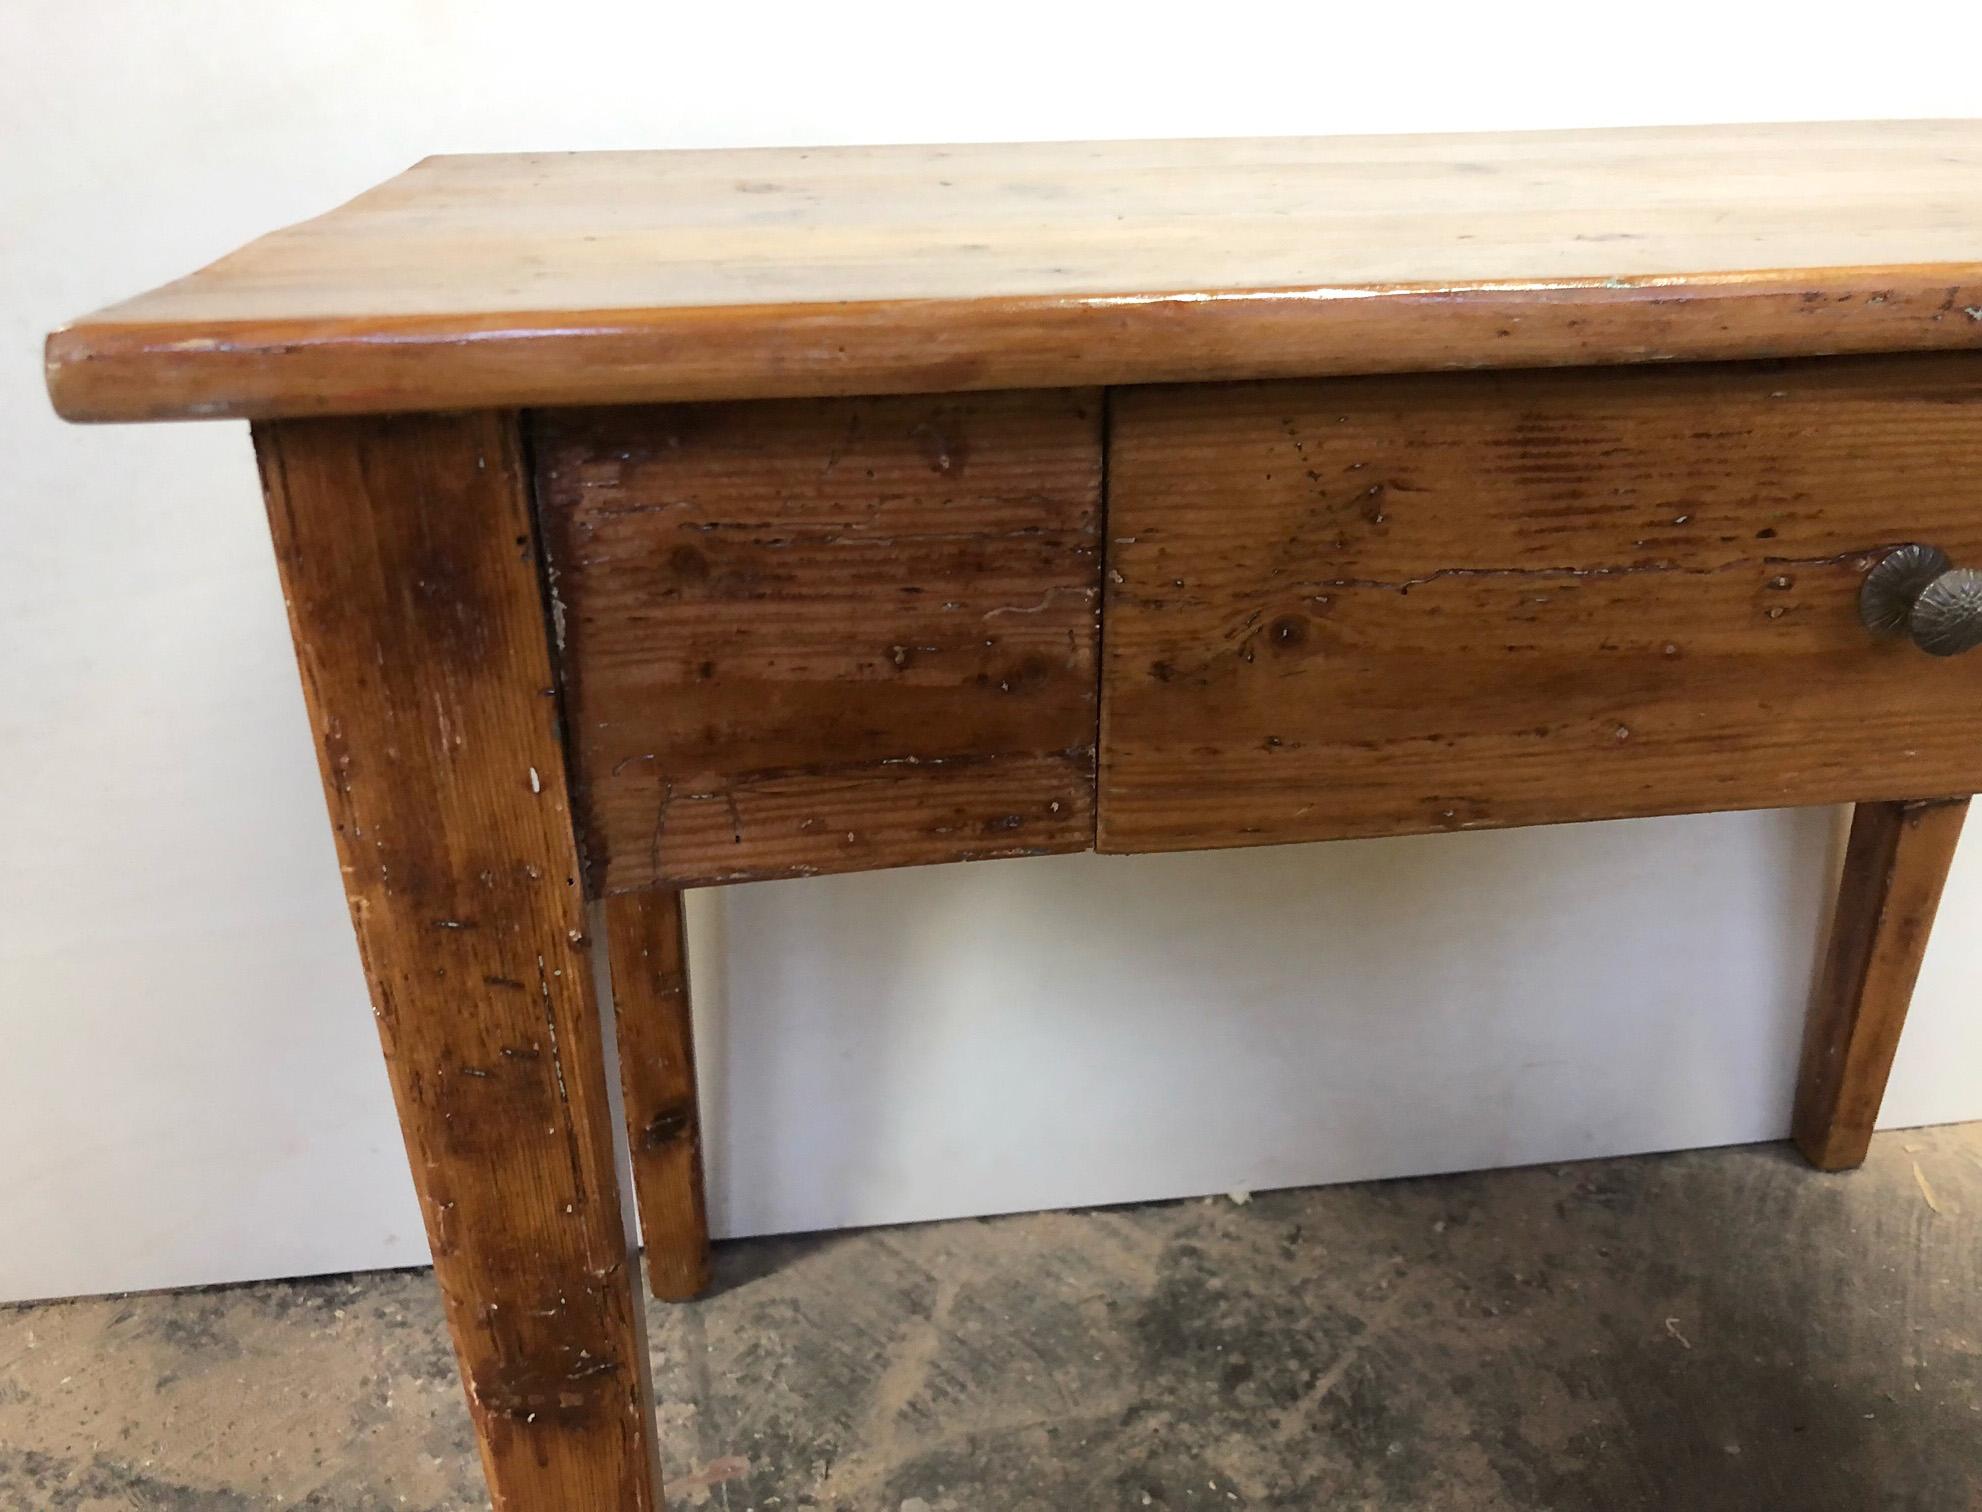 Rustic Tuscan Fir Desk Table, Original from 1900, Honey Color 6